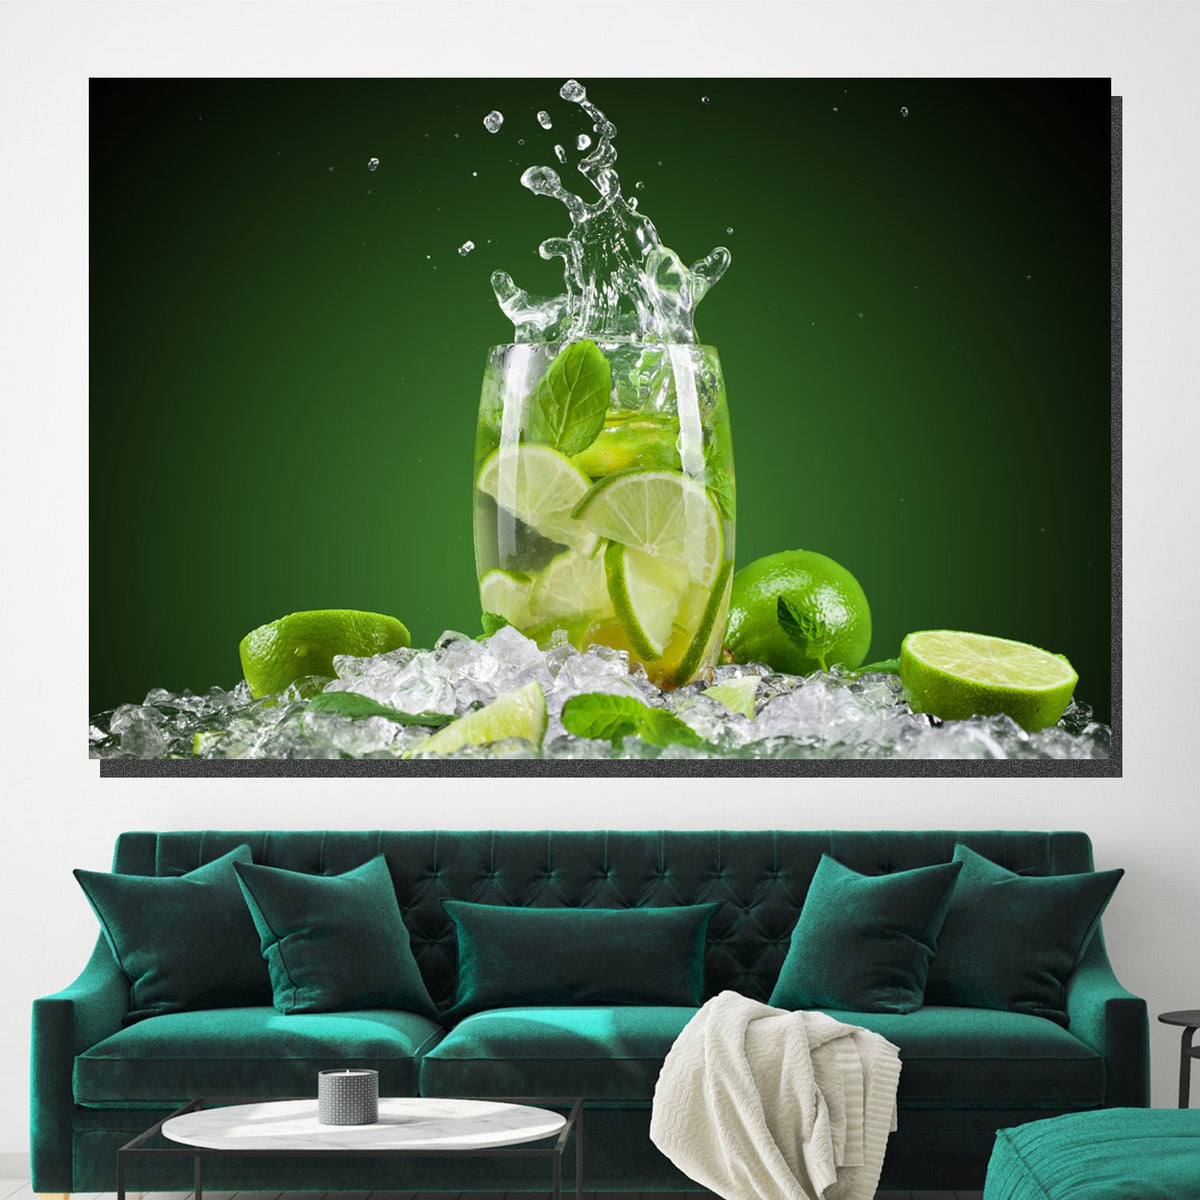 https://cdn.shopify.com/s/files/1/0387/9986/8044/products/MojitoCanvasArtprintStretched-4.jpg